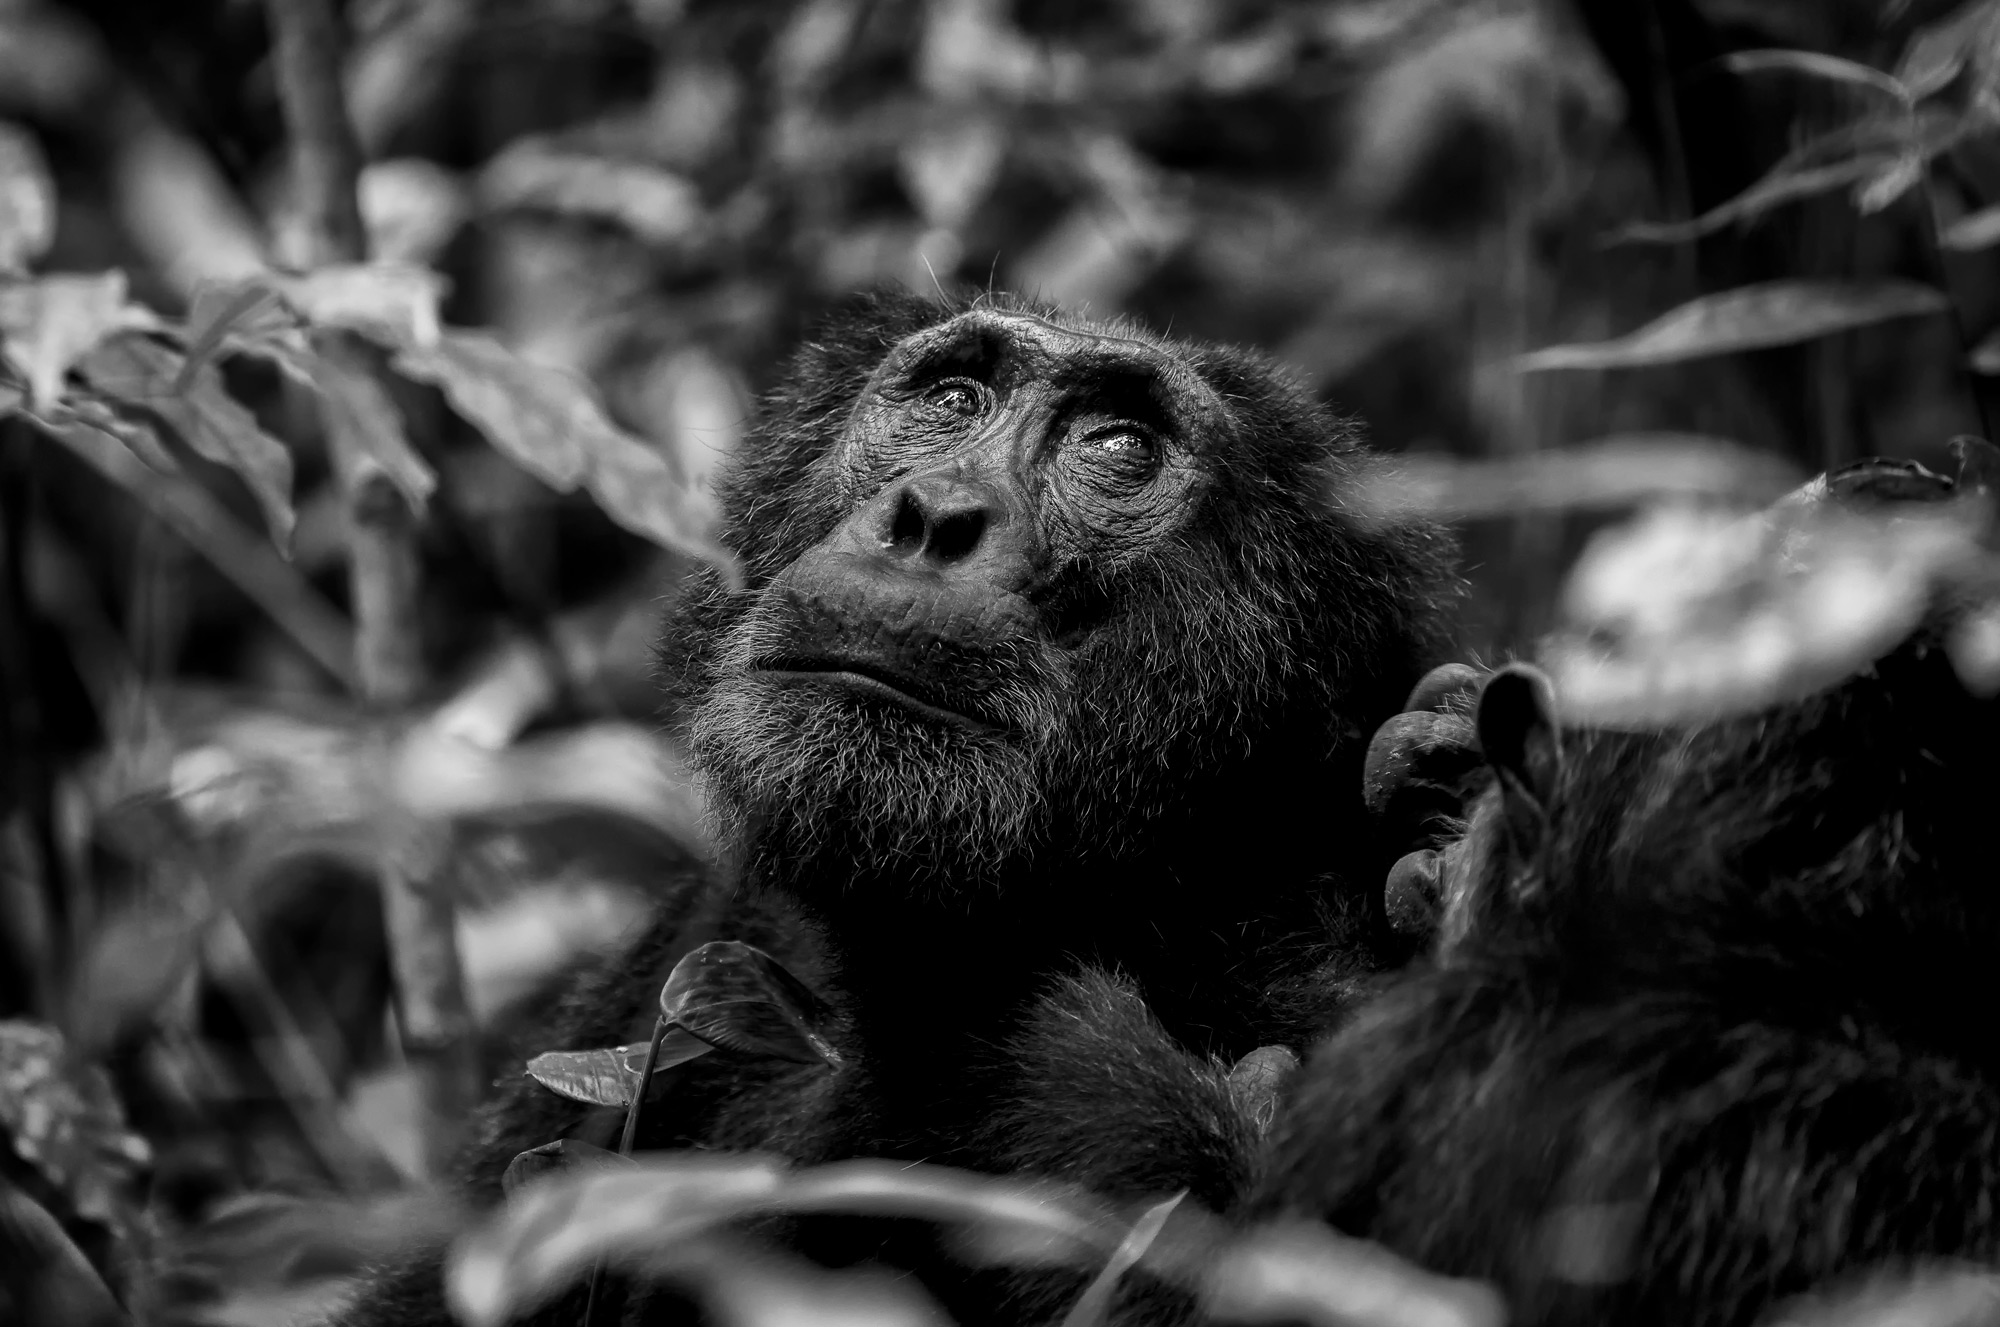 “The wise one” in Kibale National Park, Uganda © Prelena Soma Owen (Photographer of the Year 2018 Finalist)